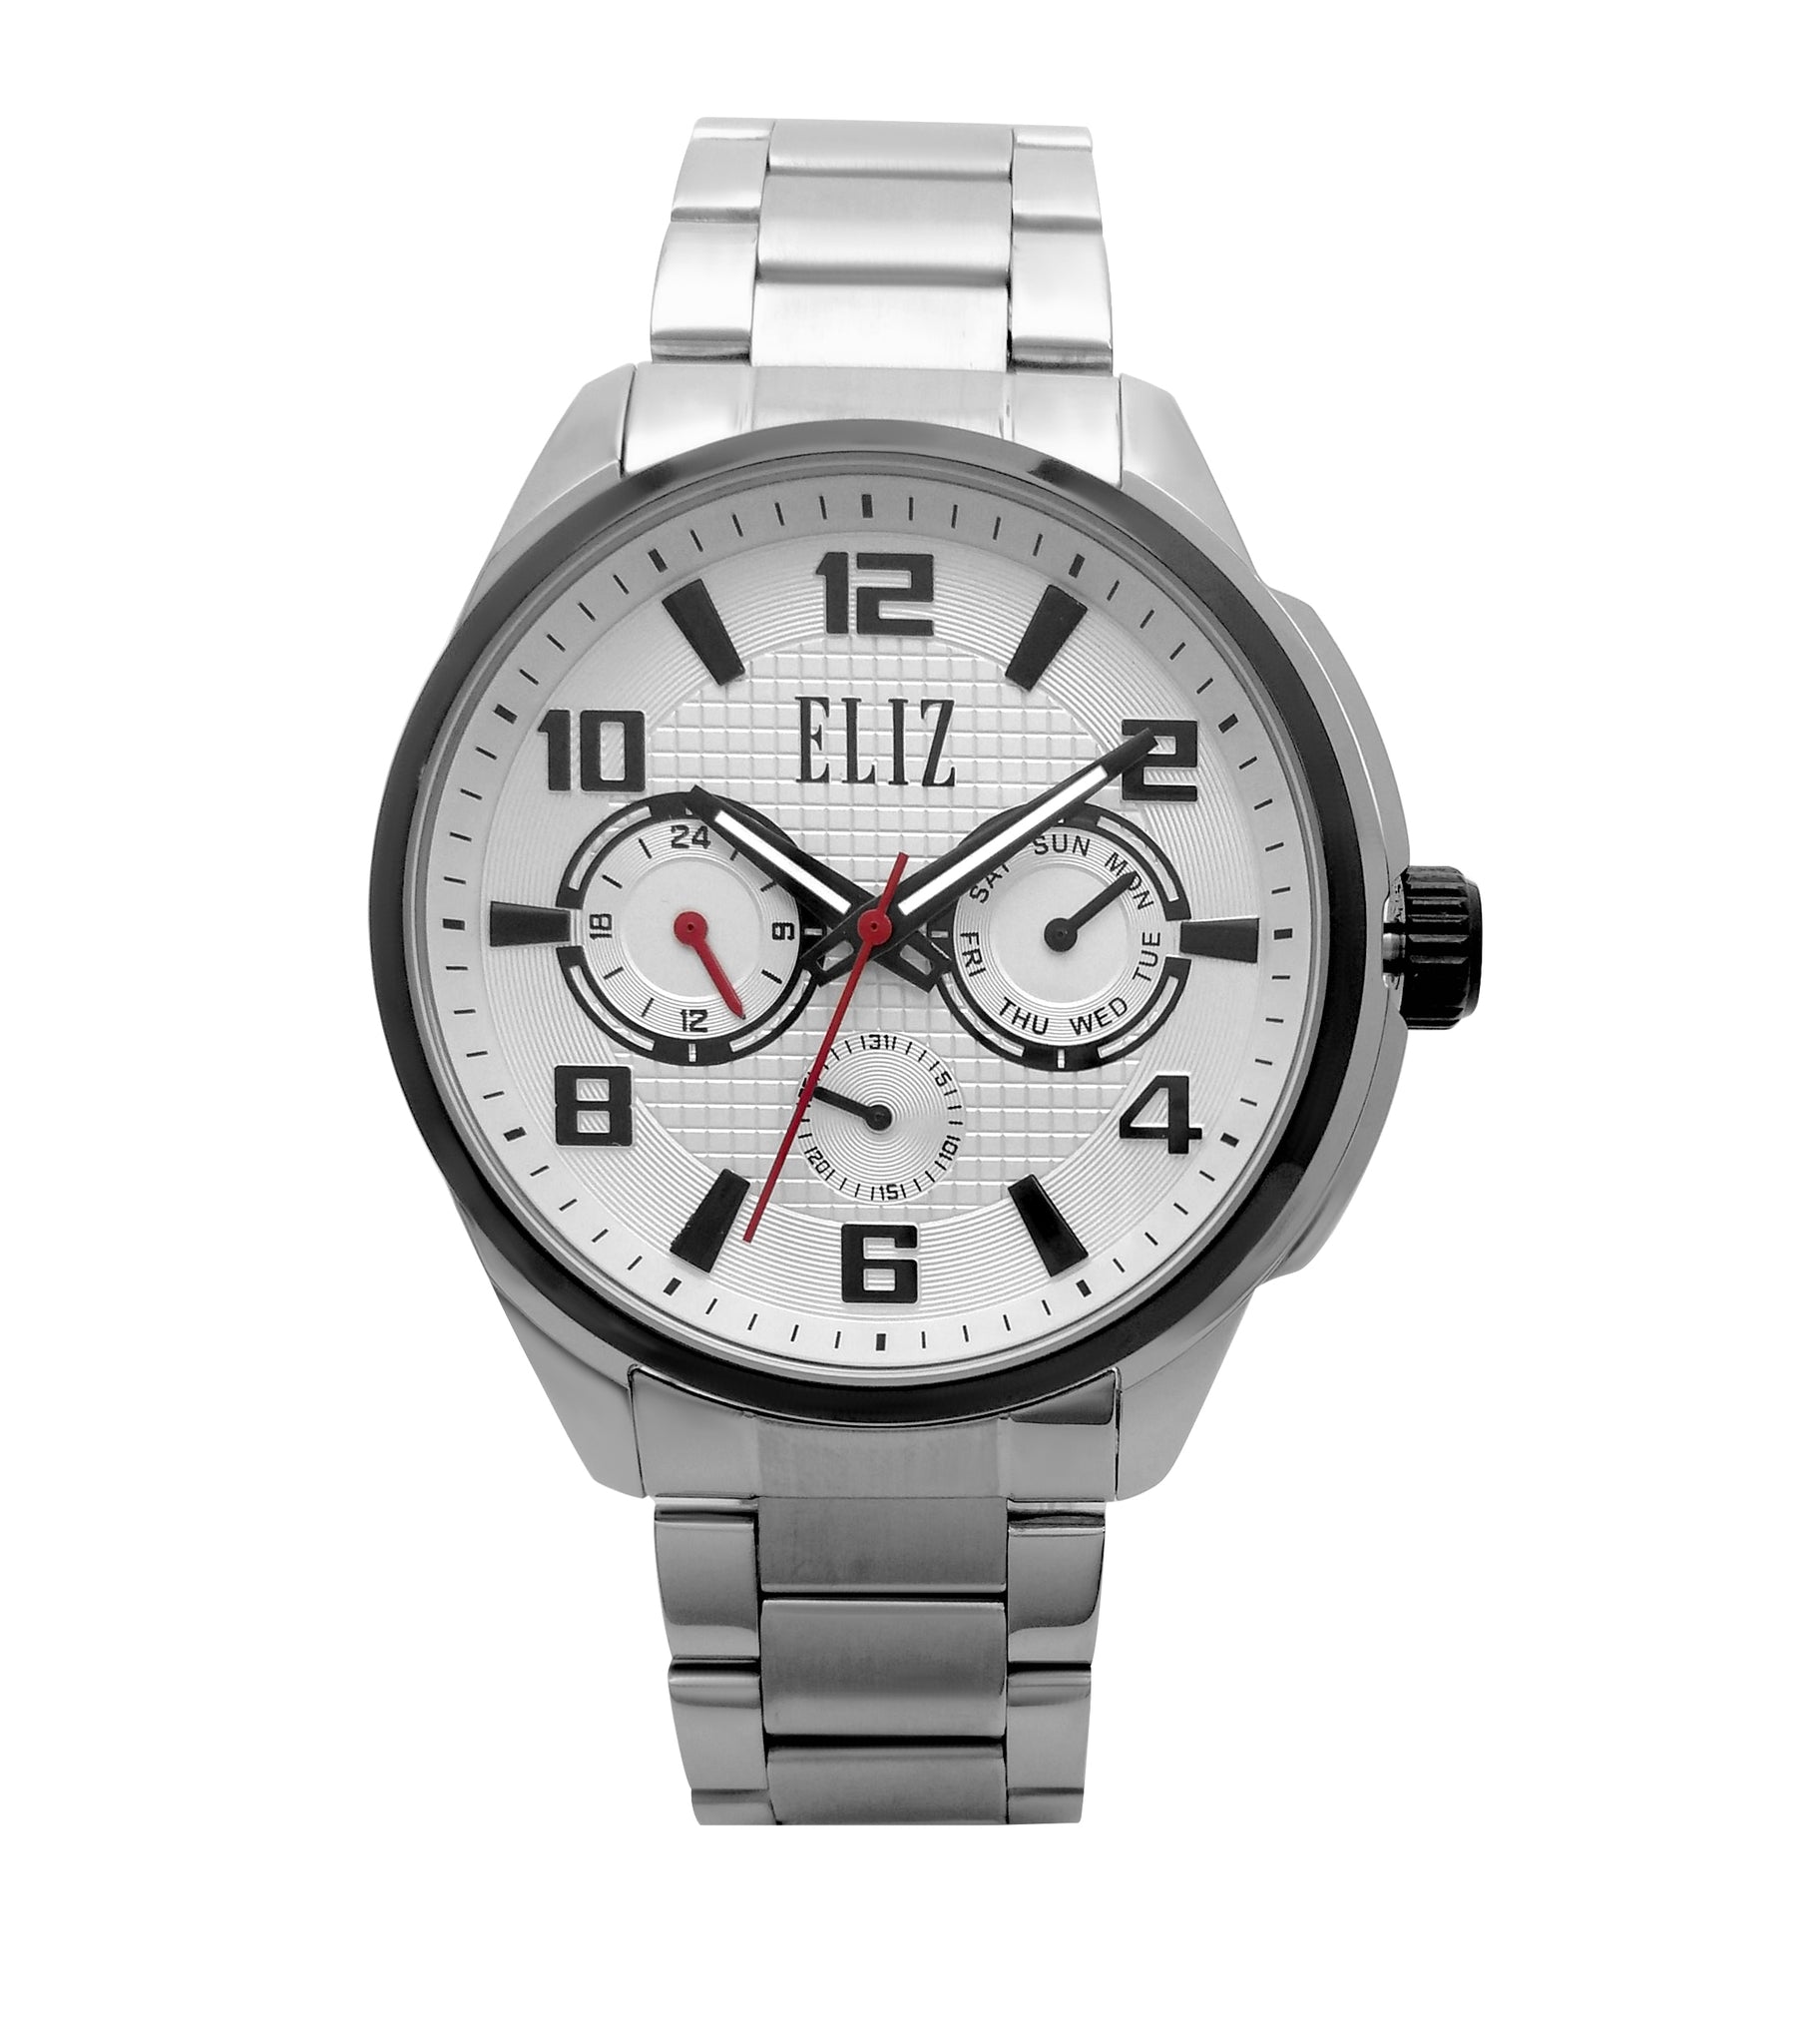 Eliz Couple Watch Online shopping With Best Offers In Manama,BAHRAIN |  Ourshopee.com 341